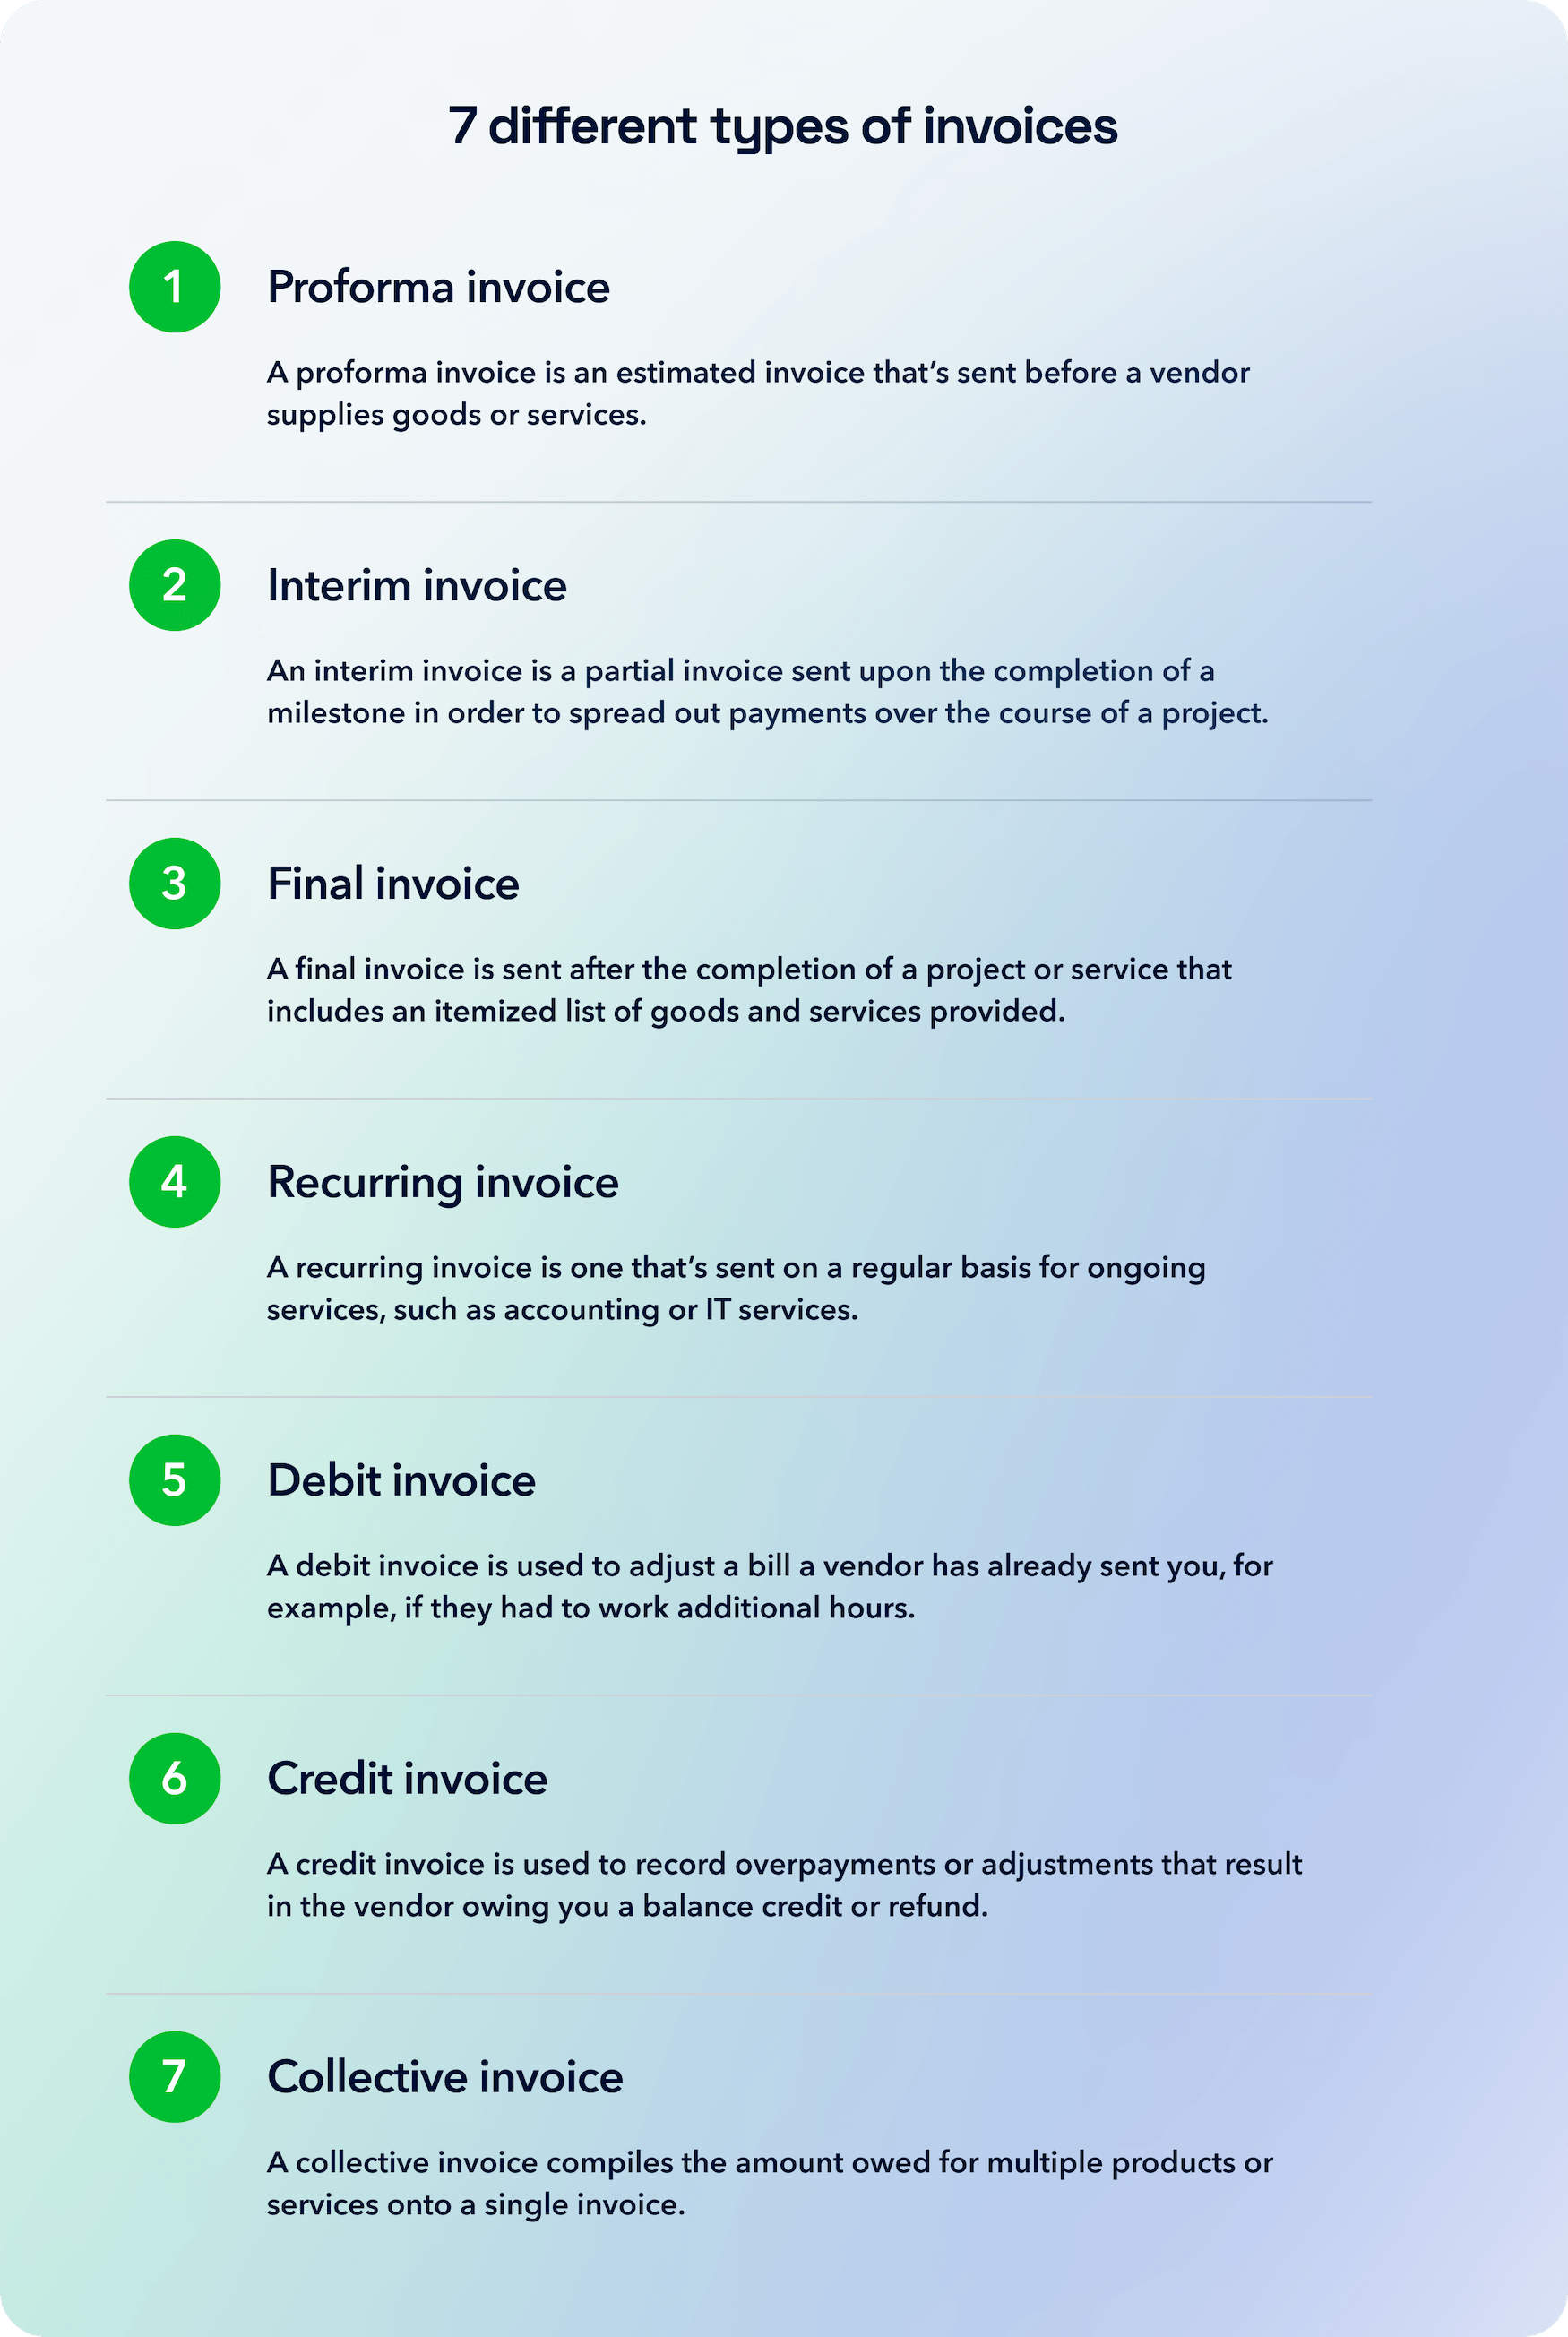 7 different types of invoices